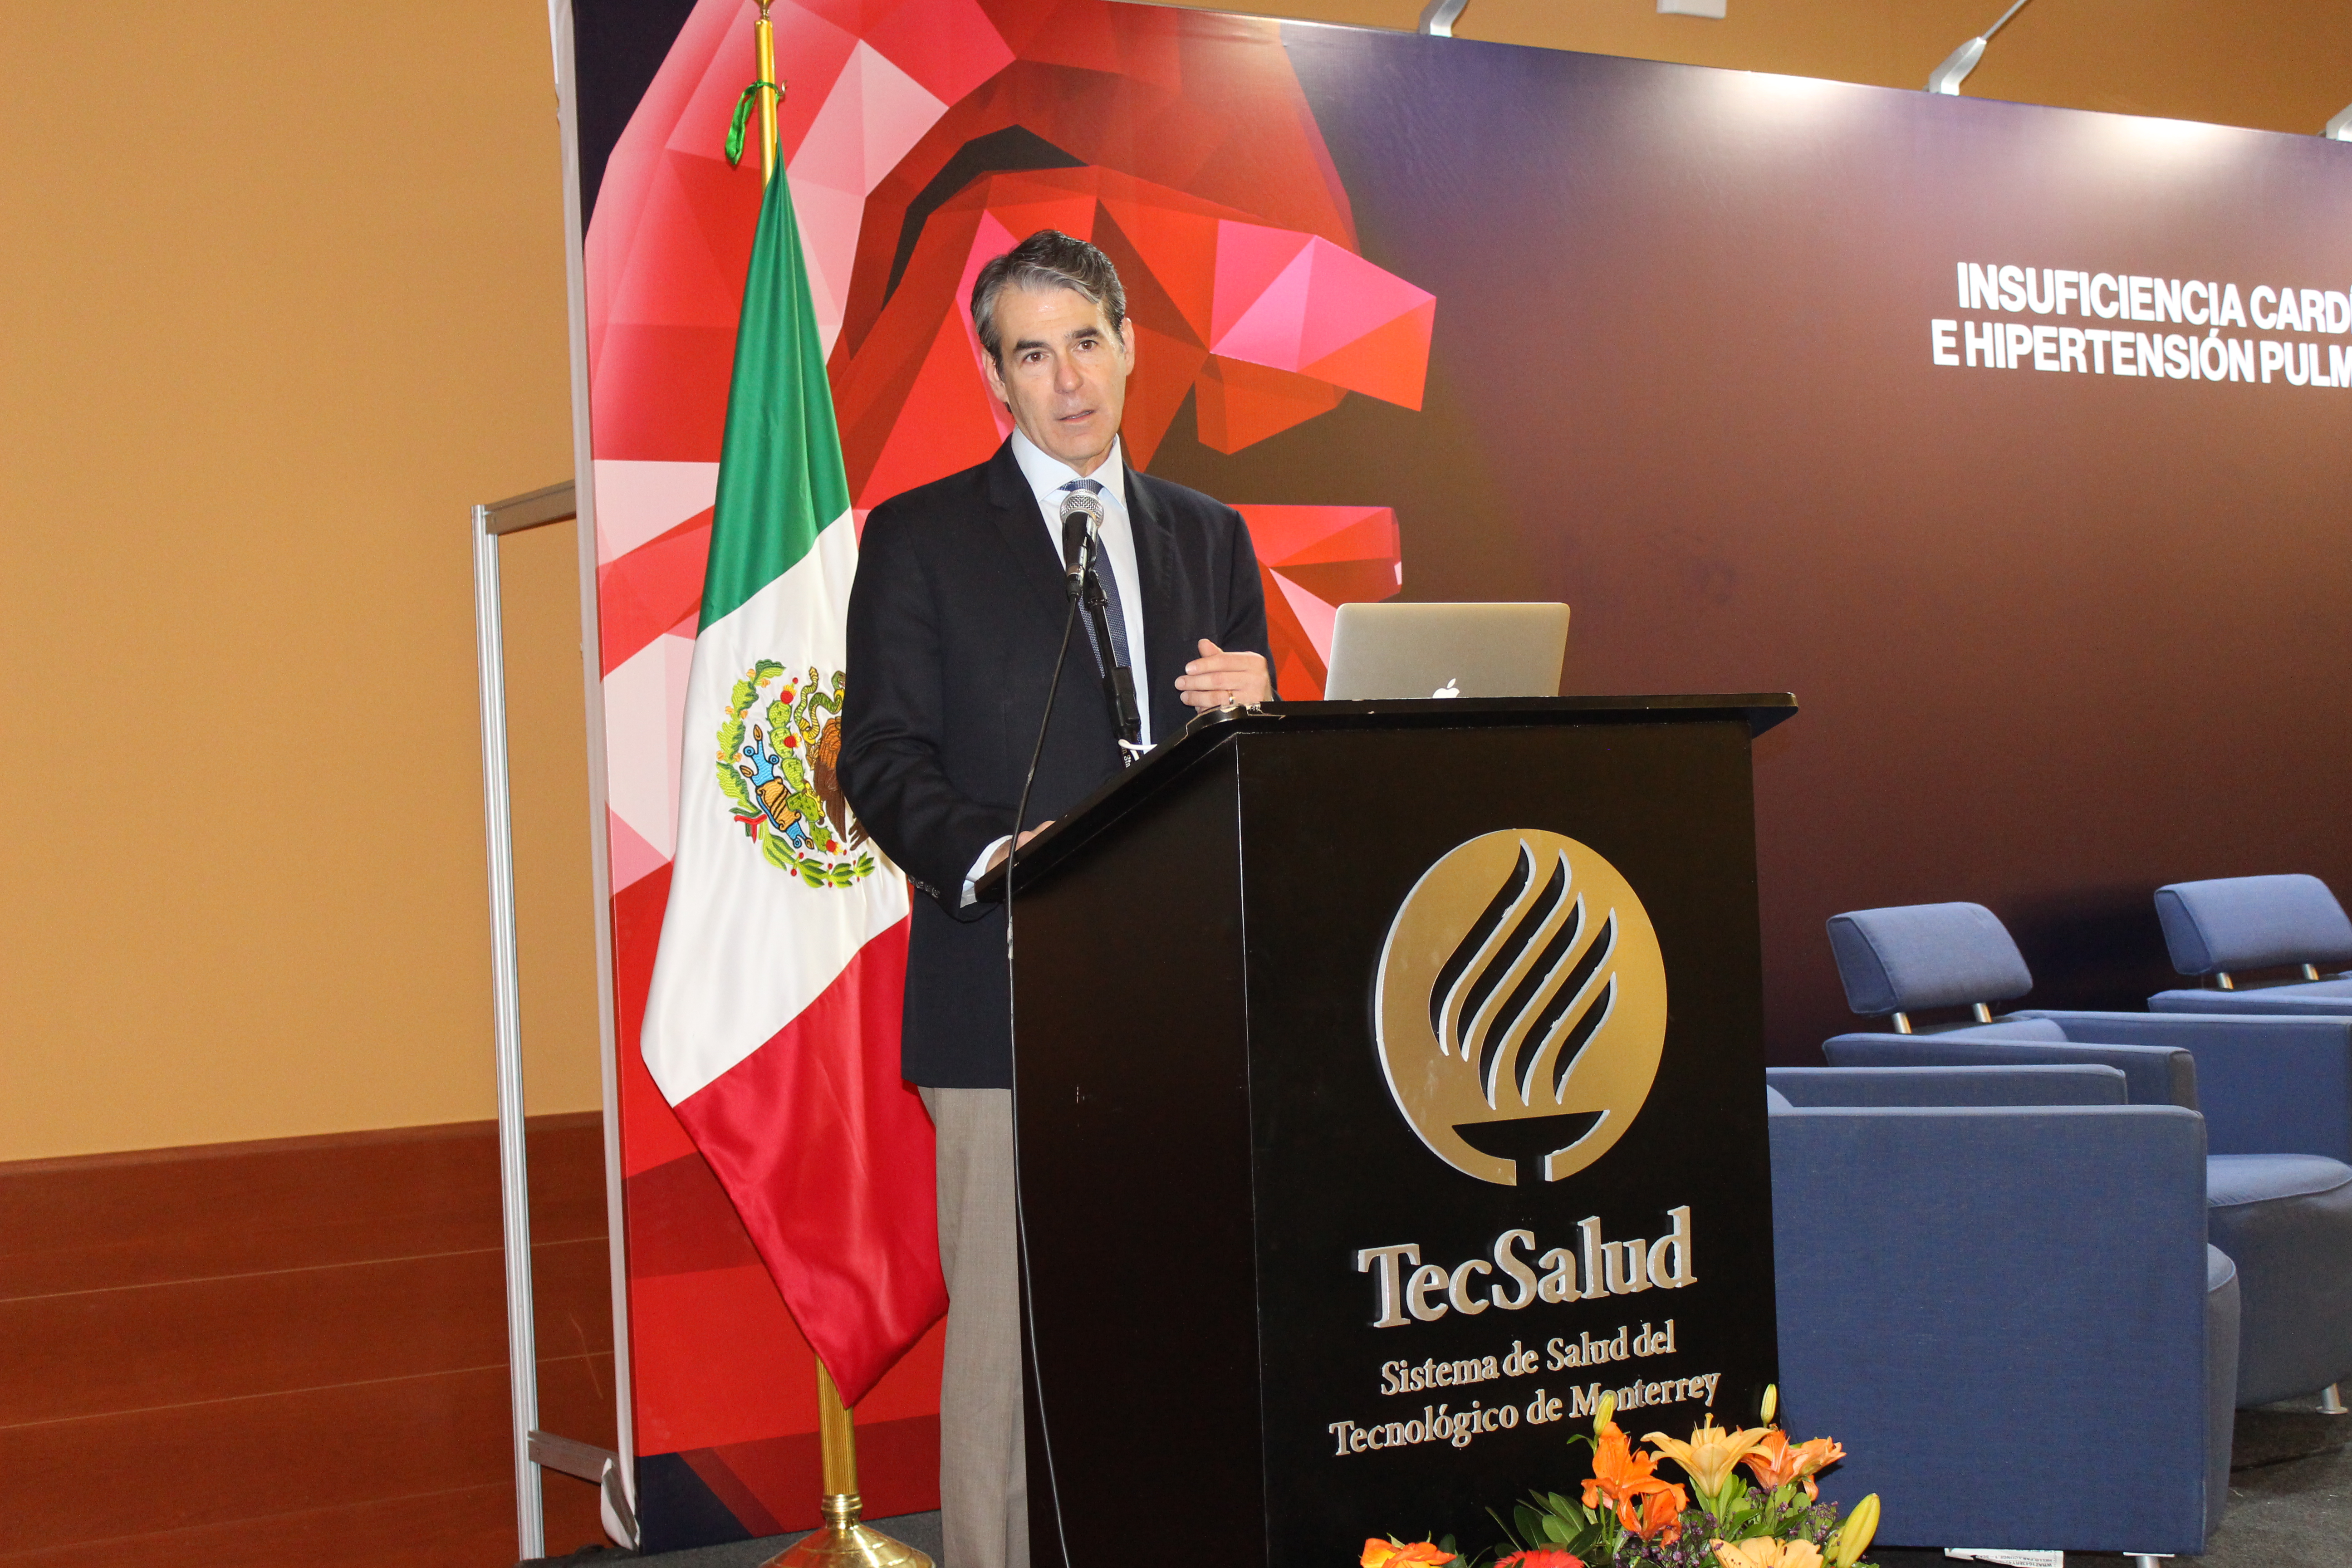 Dr. Guillermo Torre